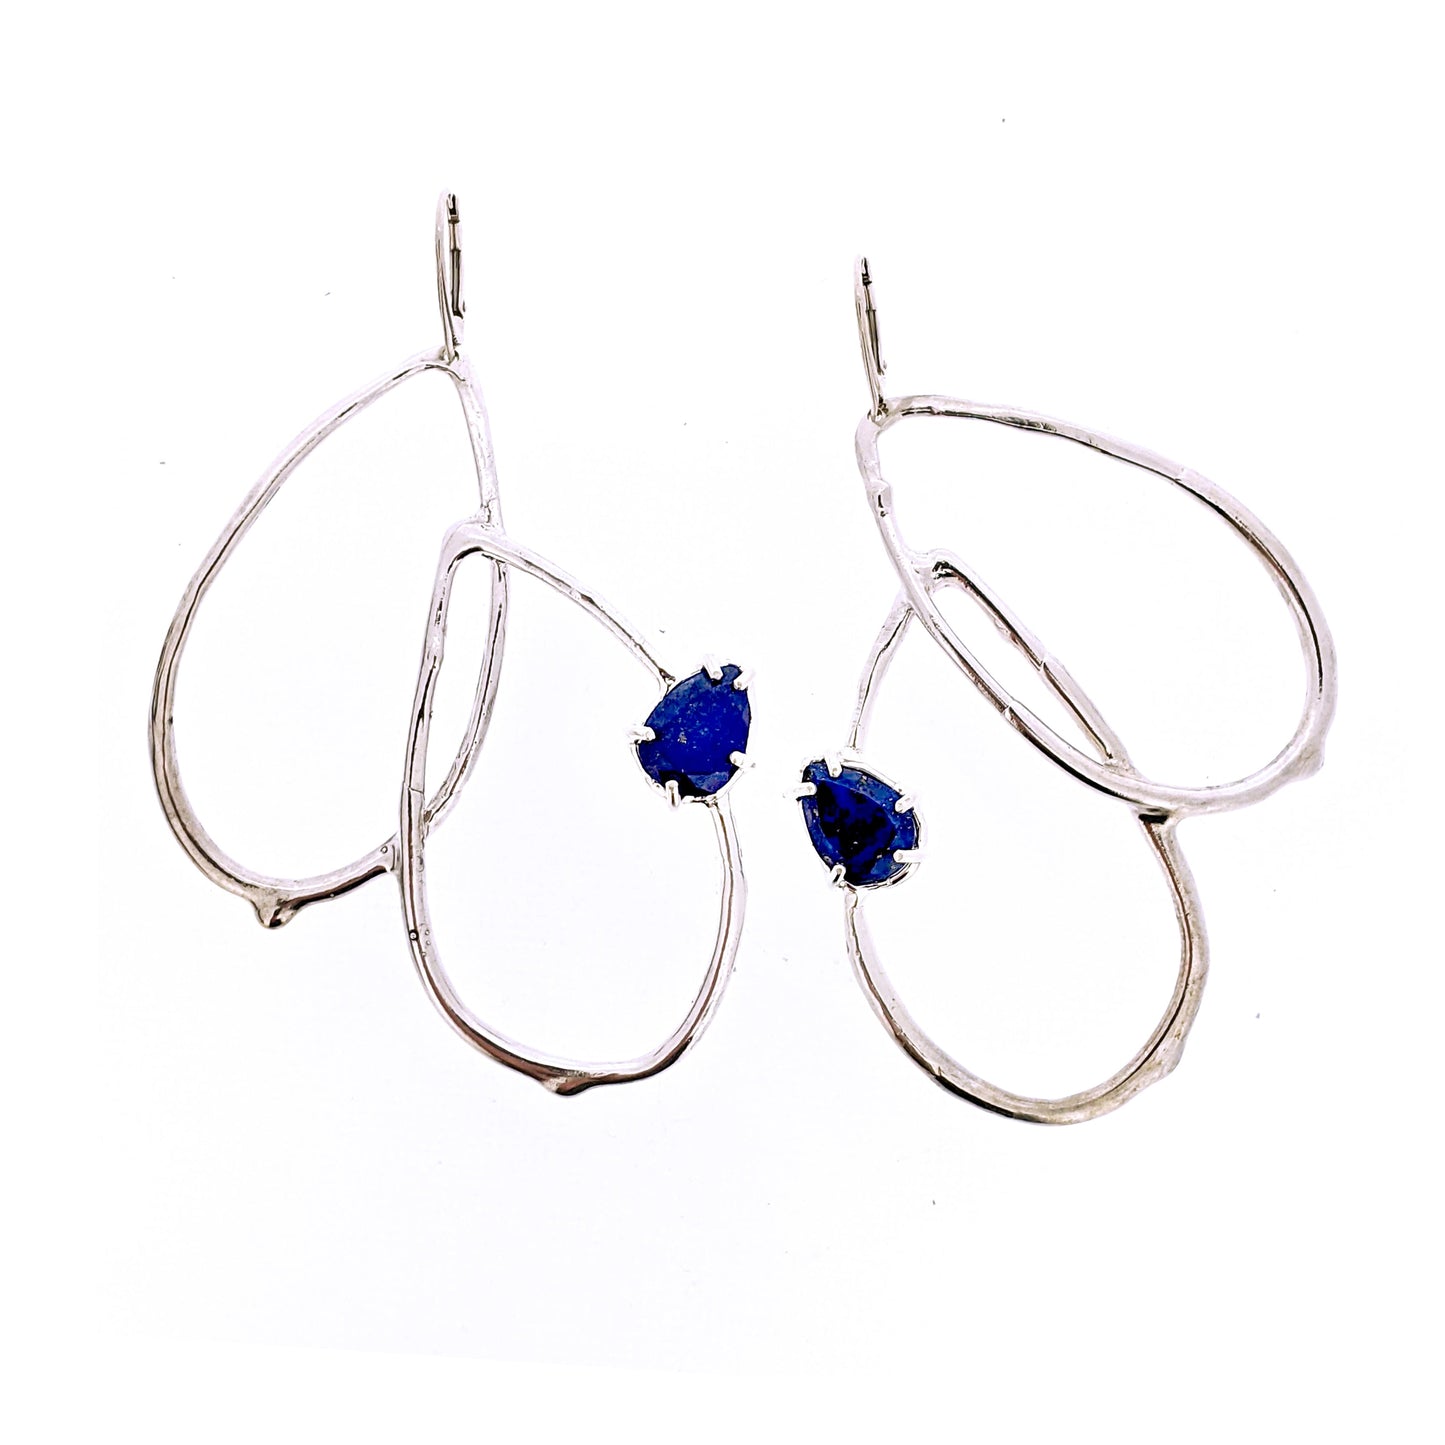 Full view of Harlow Earring - Lapis. An statement earring featuring curved tear-drop shaped forms with an organic texture resembling a smooth twig or vine with a set pear shaped lapis on each earring.